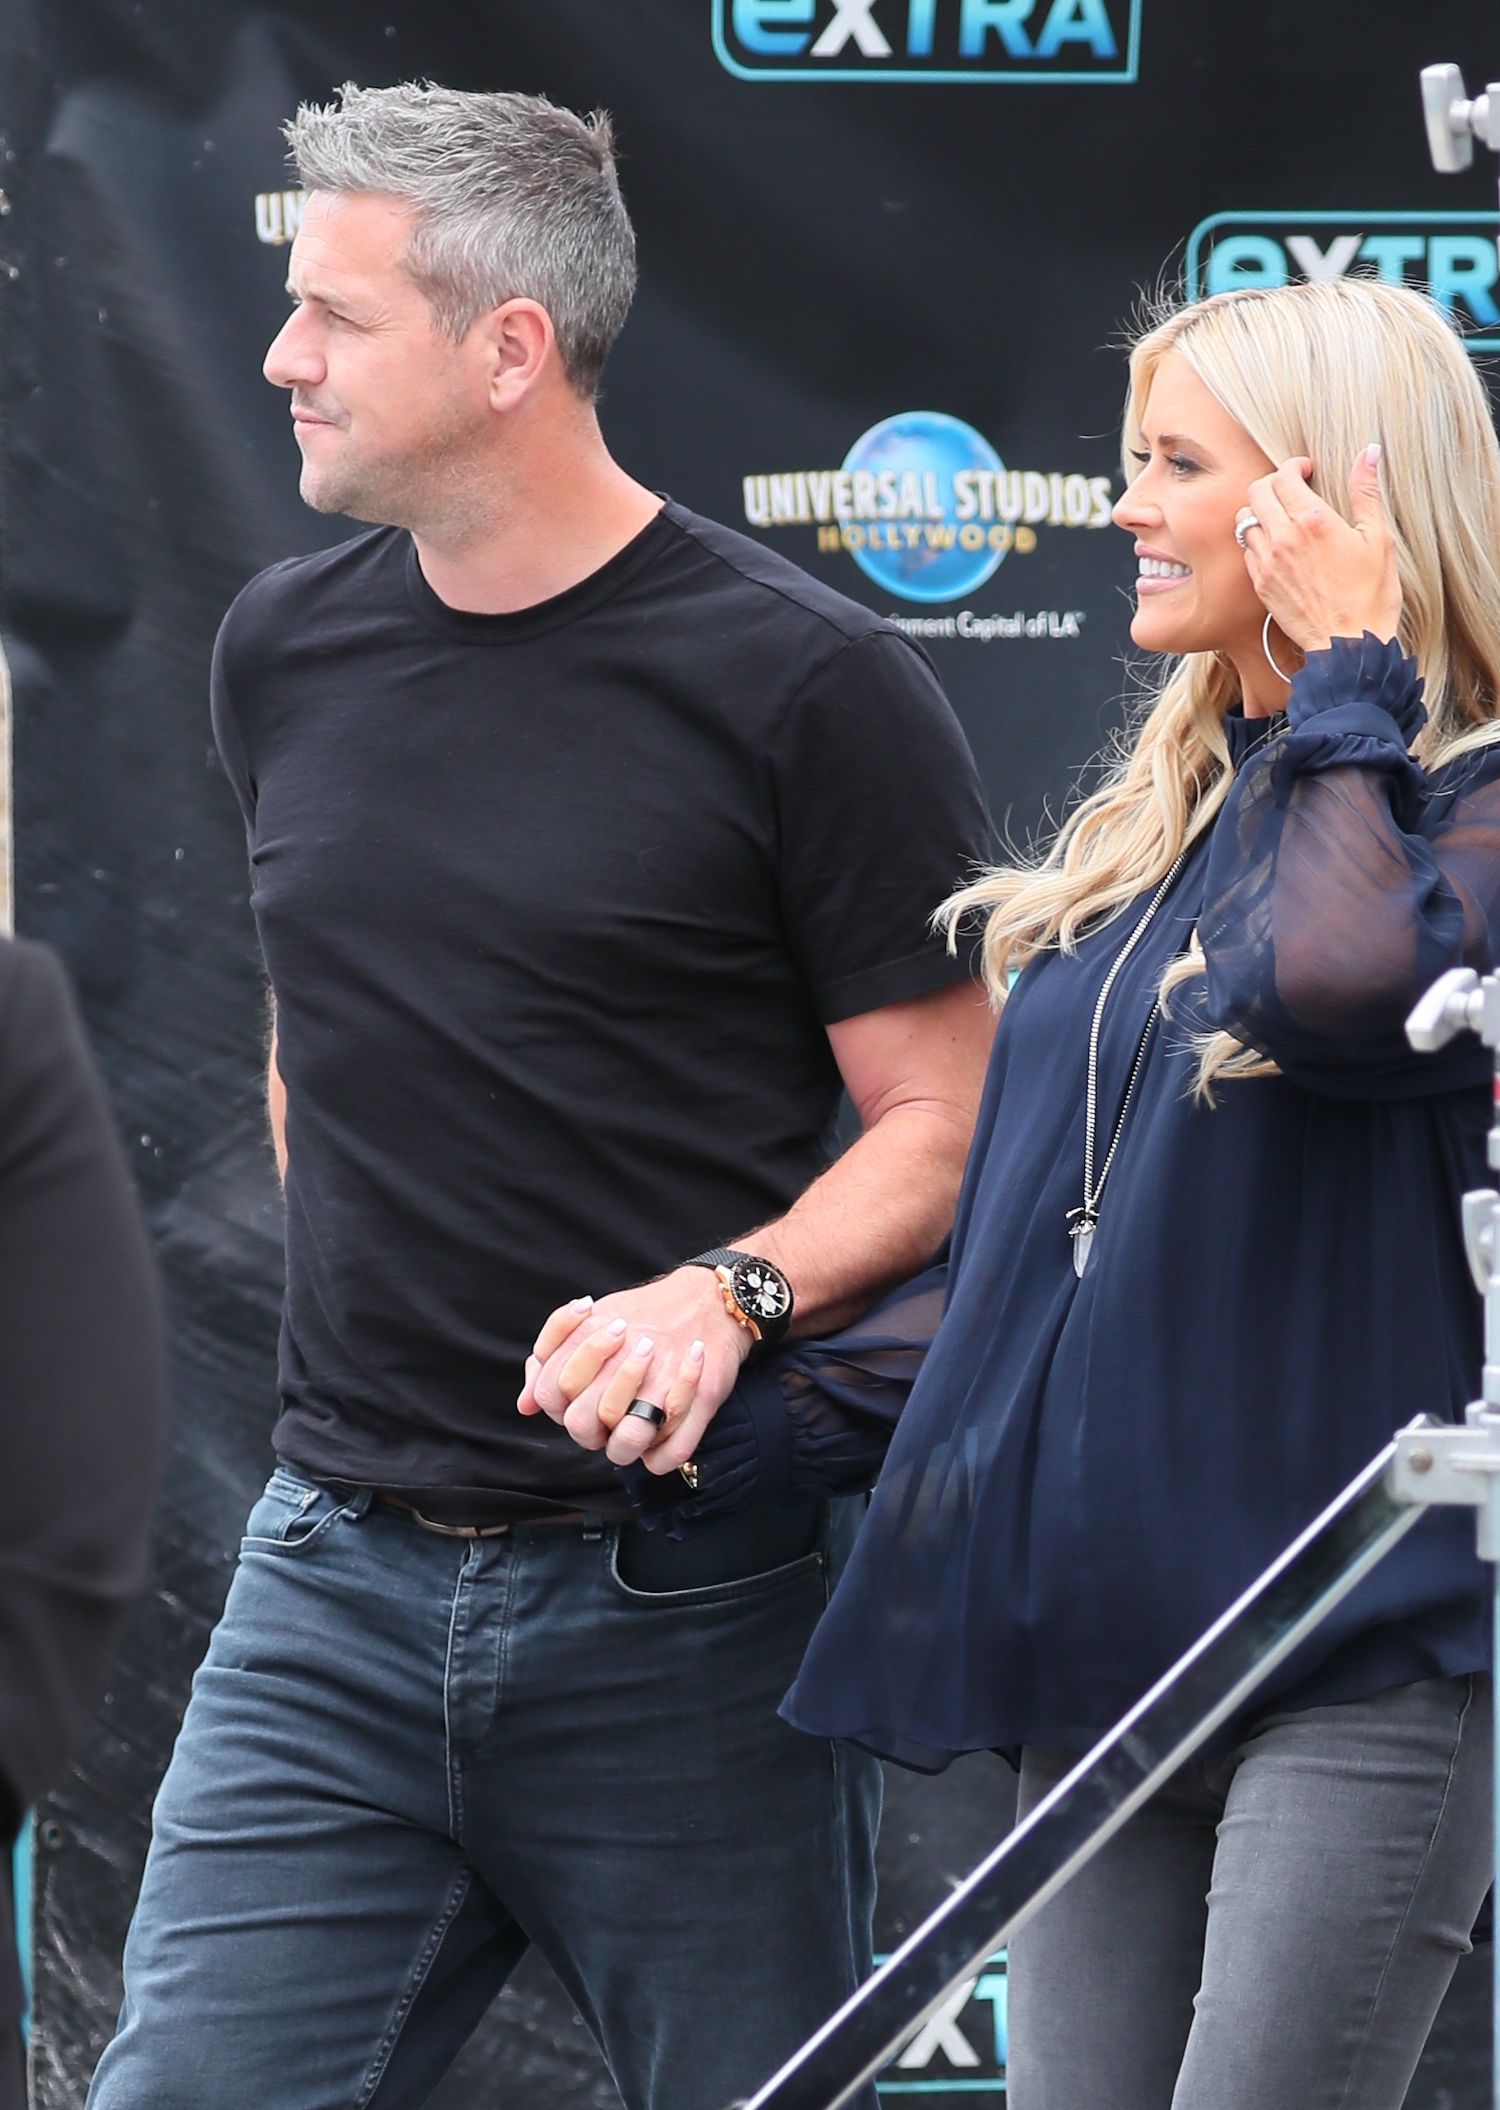 Ant Anstead and Christina Haack holding hands and walking onto the 'Extra' set in 2019